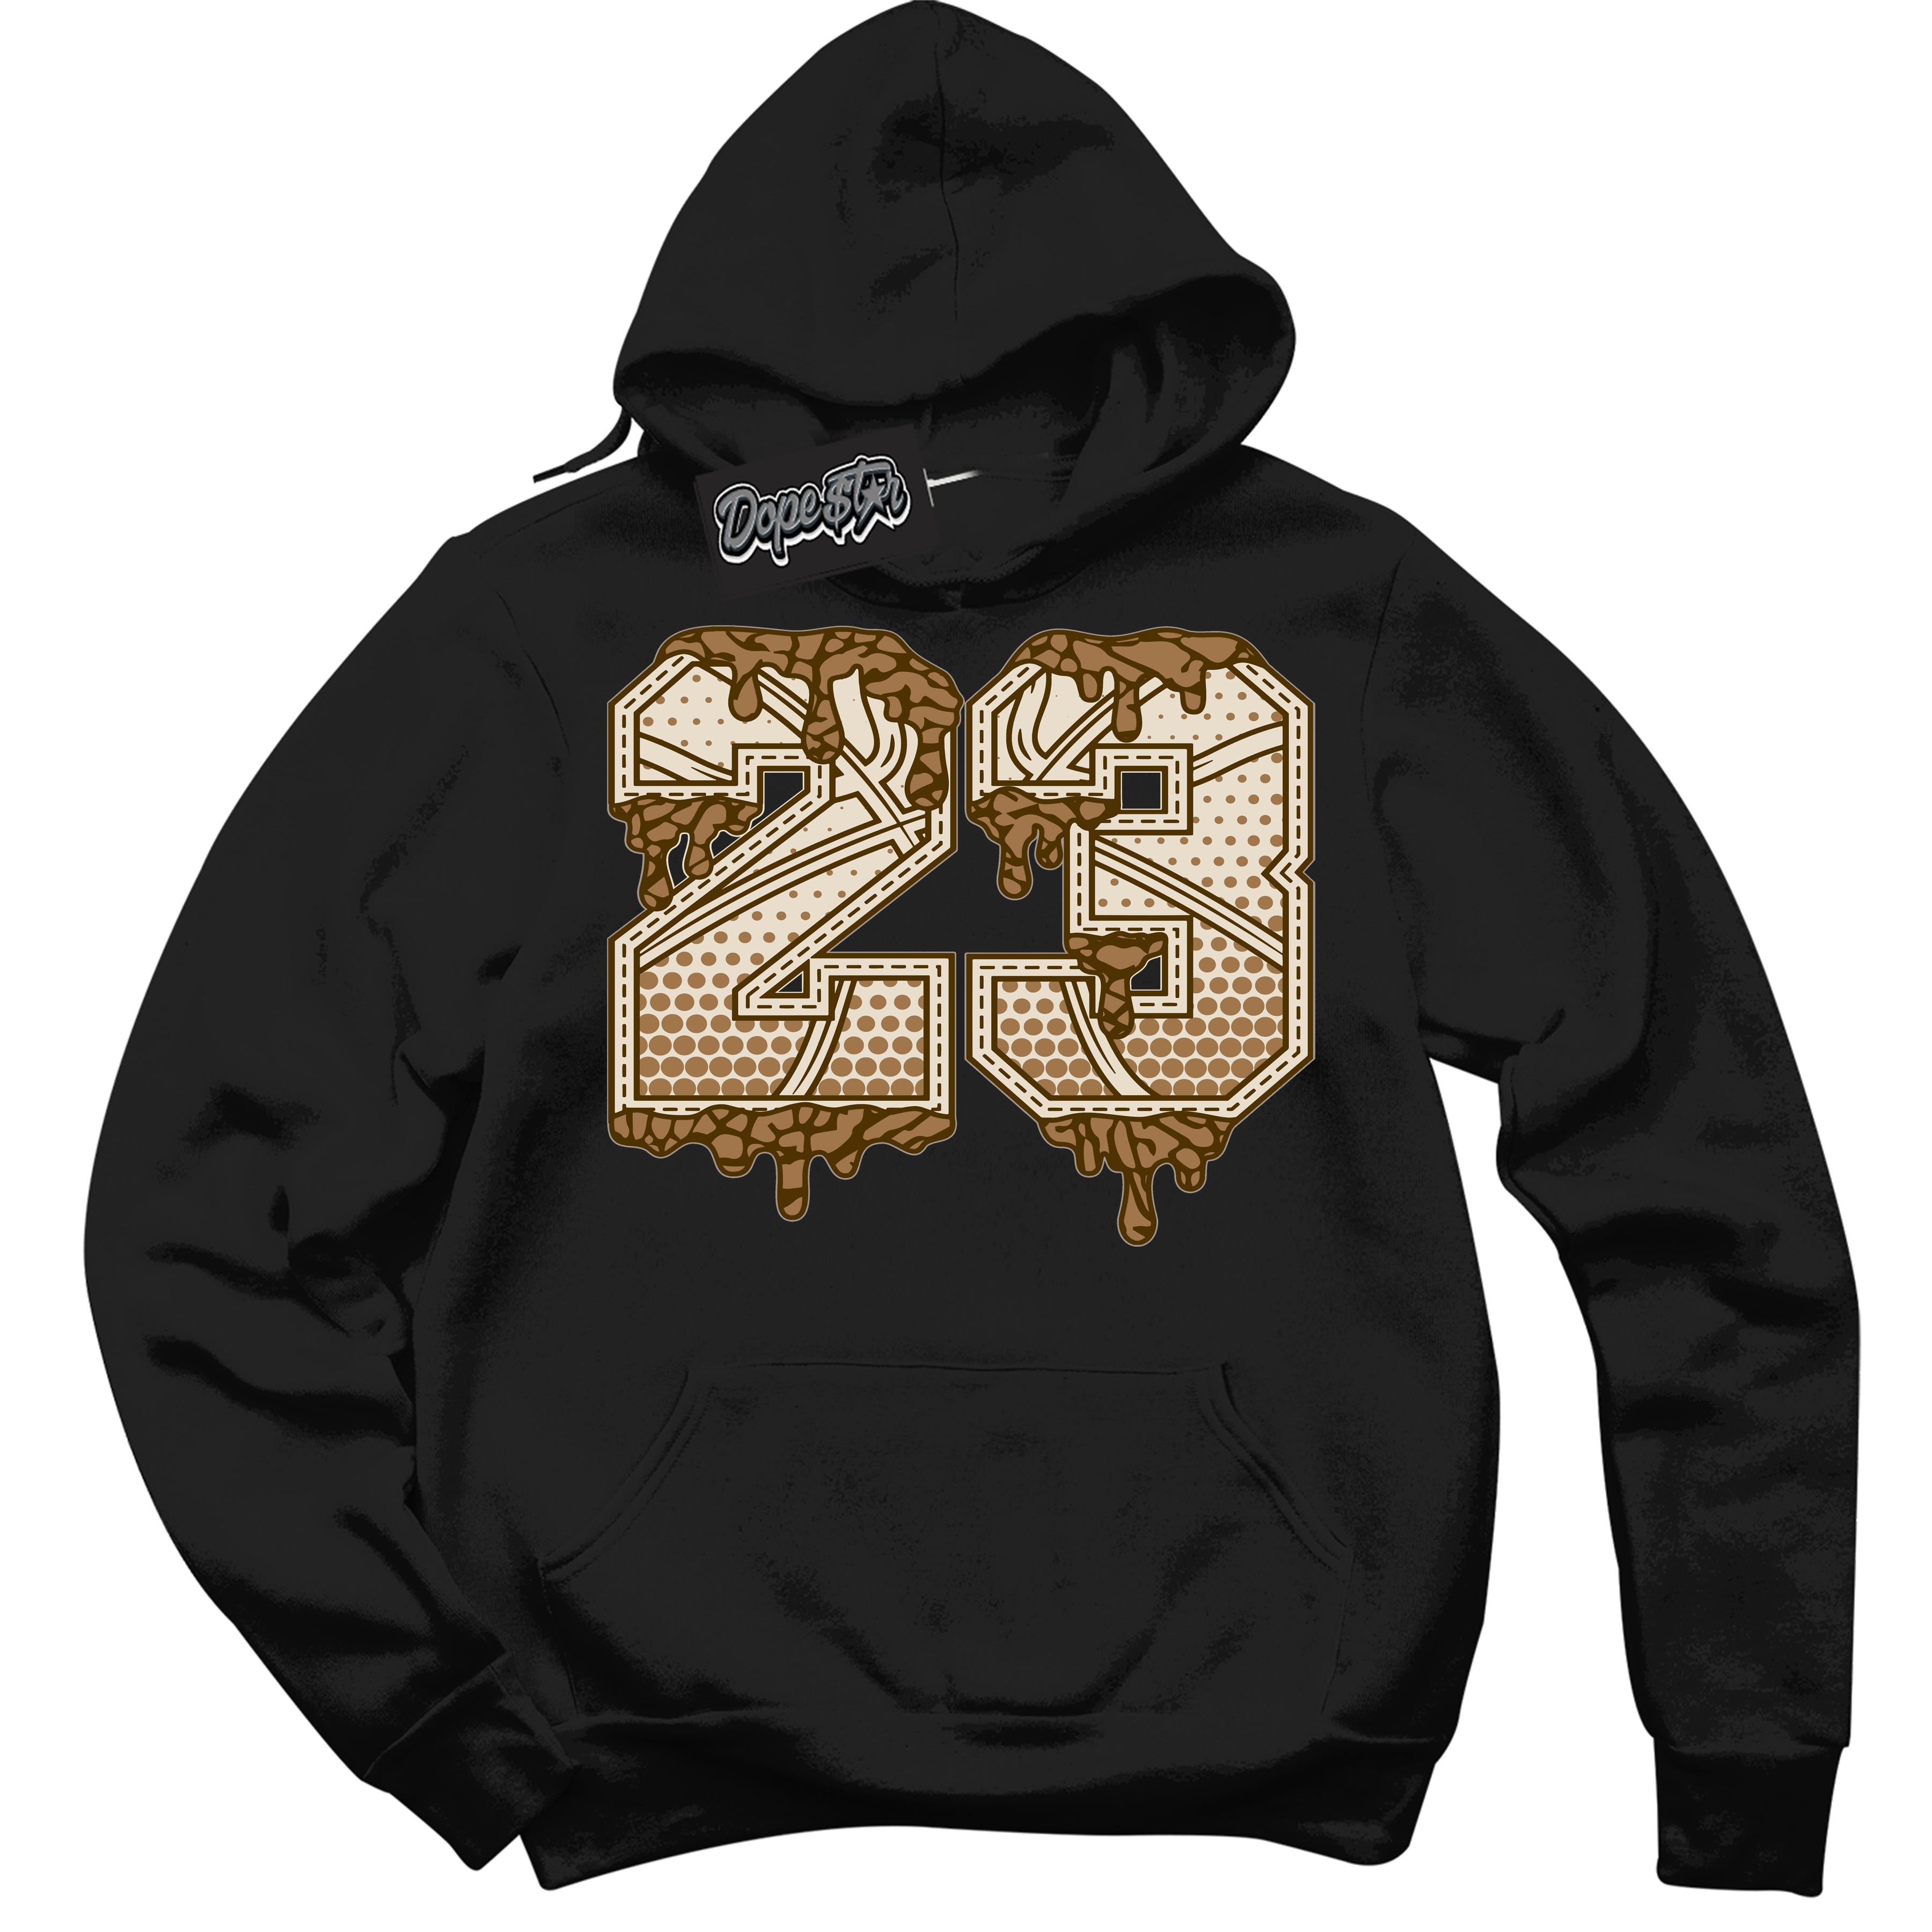 Cool Black Graphic DopeStar Hoodie with “ 23 Ball “ print, that perfectly matches Palomino 3s sneakers